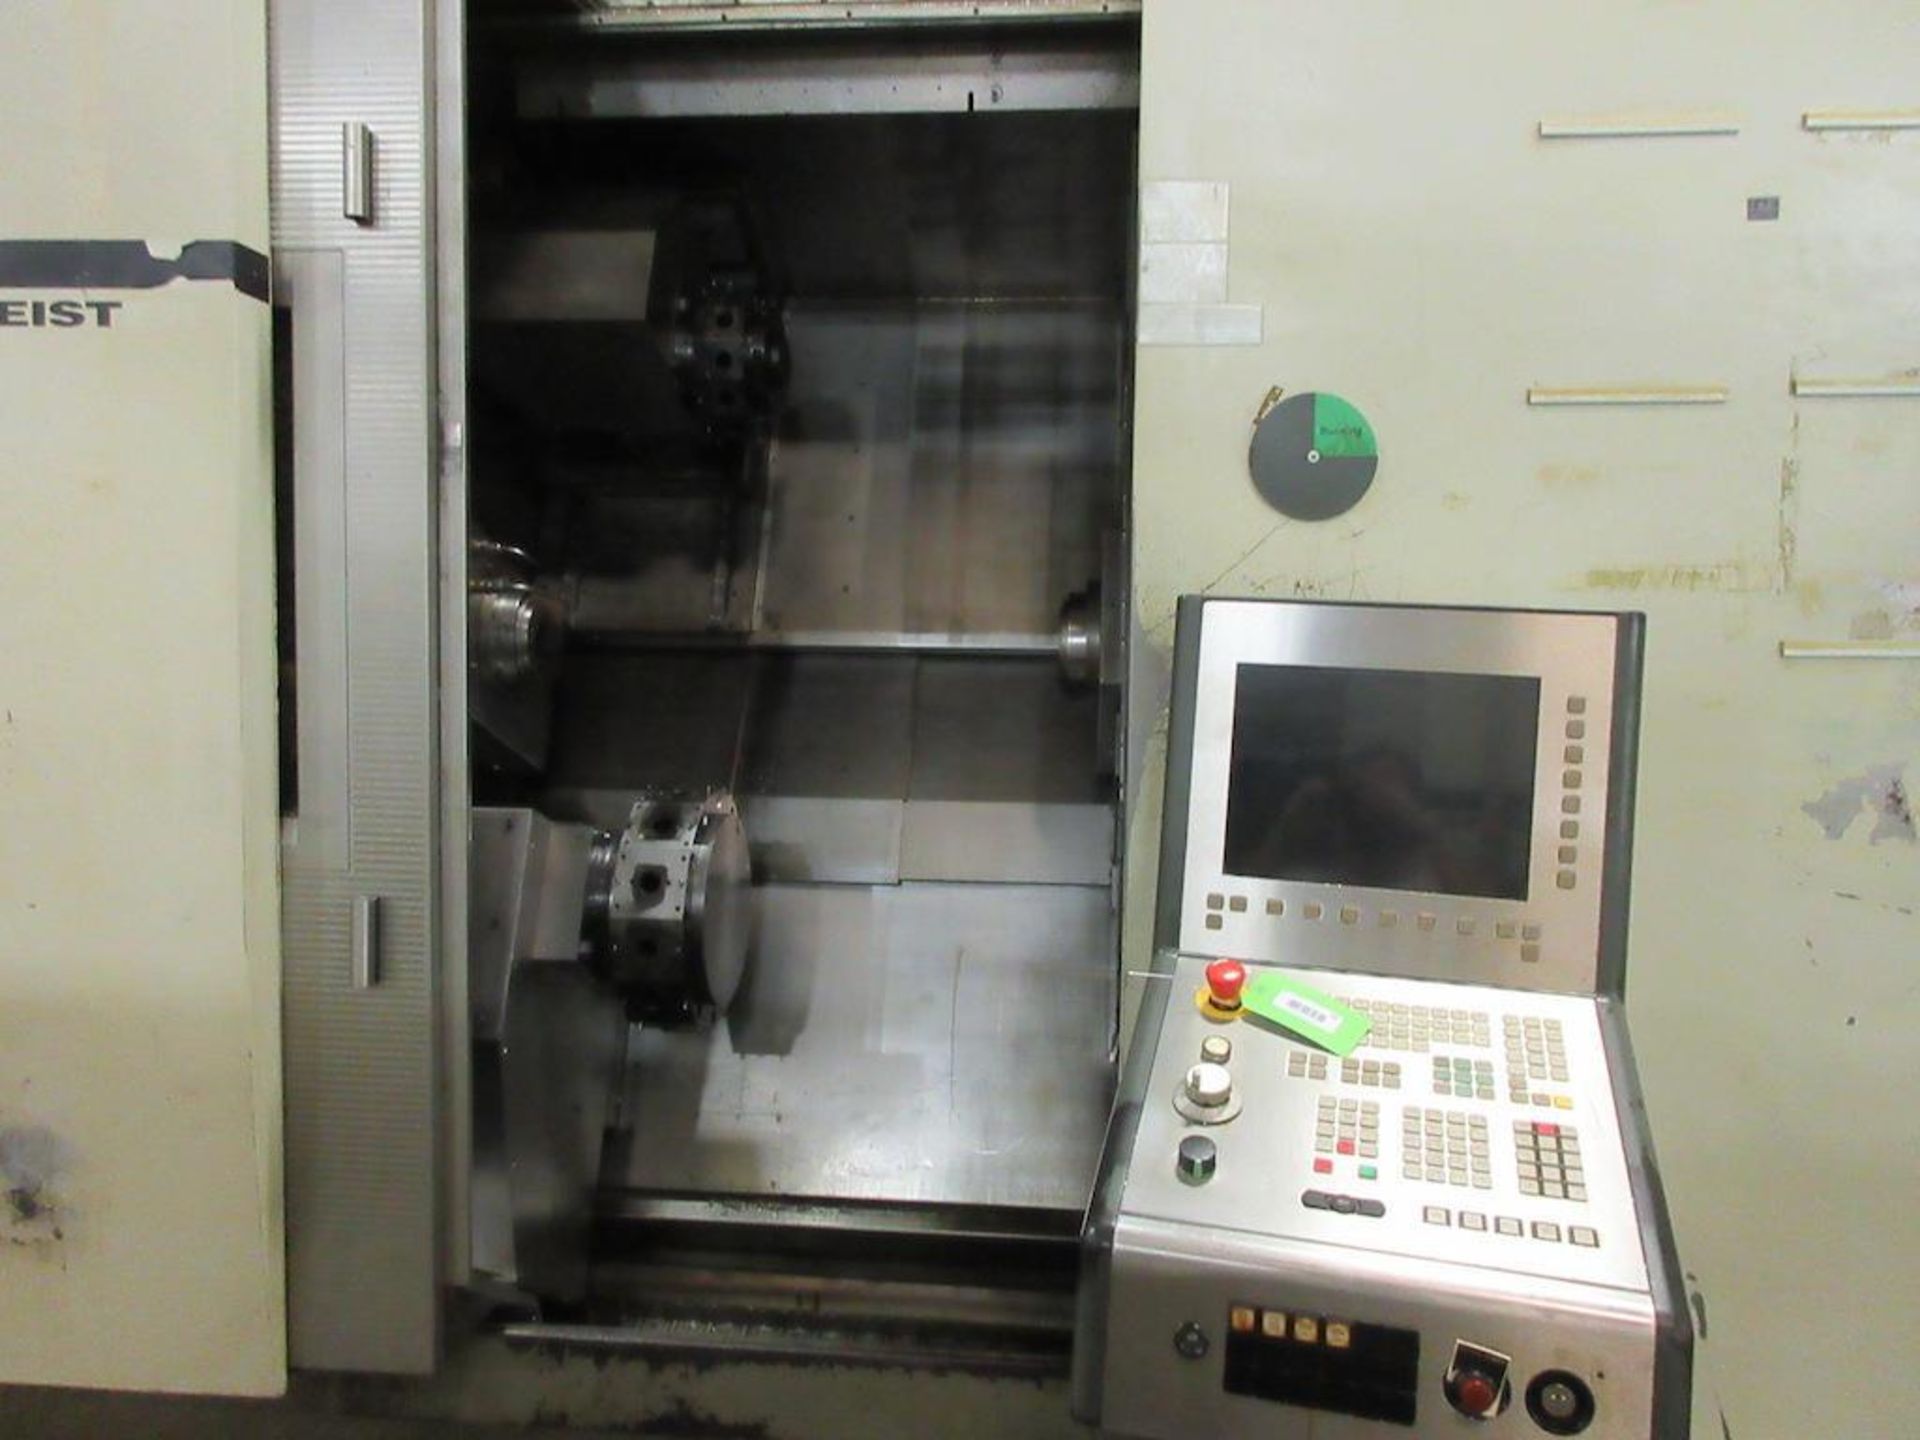 2006 DMG CNC Lathe, Model Twin 42, Twin Spindle, 4 Axis, CNC Control, B-Axis, Swing Diameter 5.7Ó, - Image 2 of 16